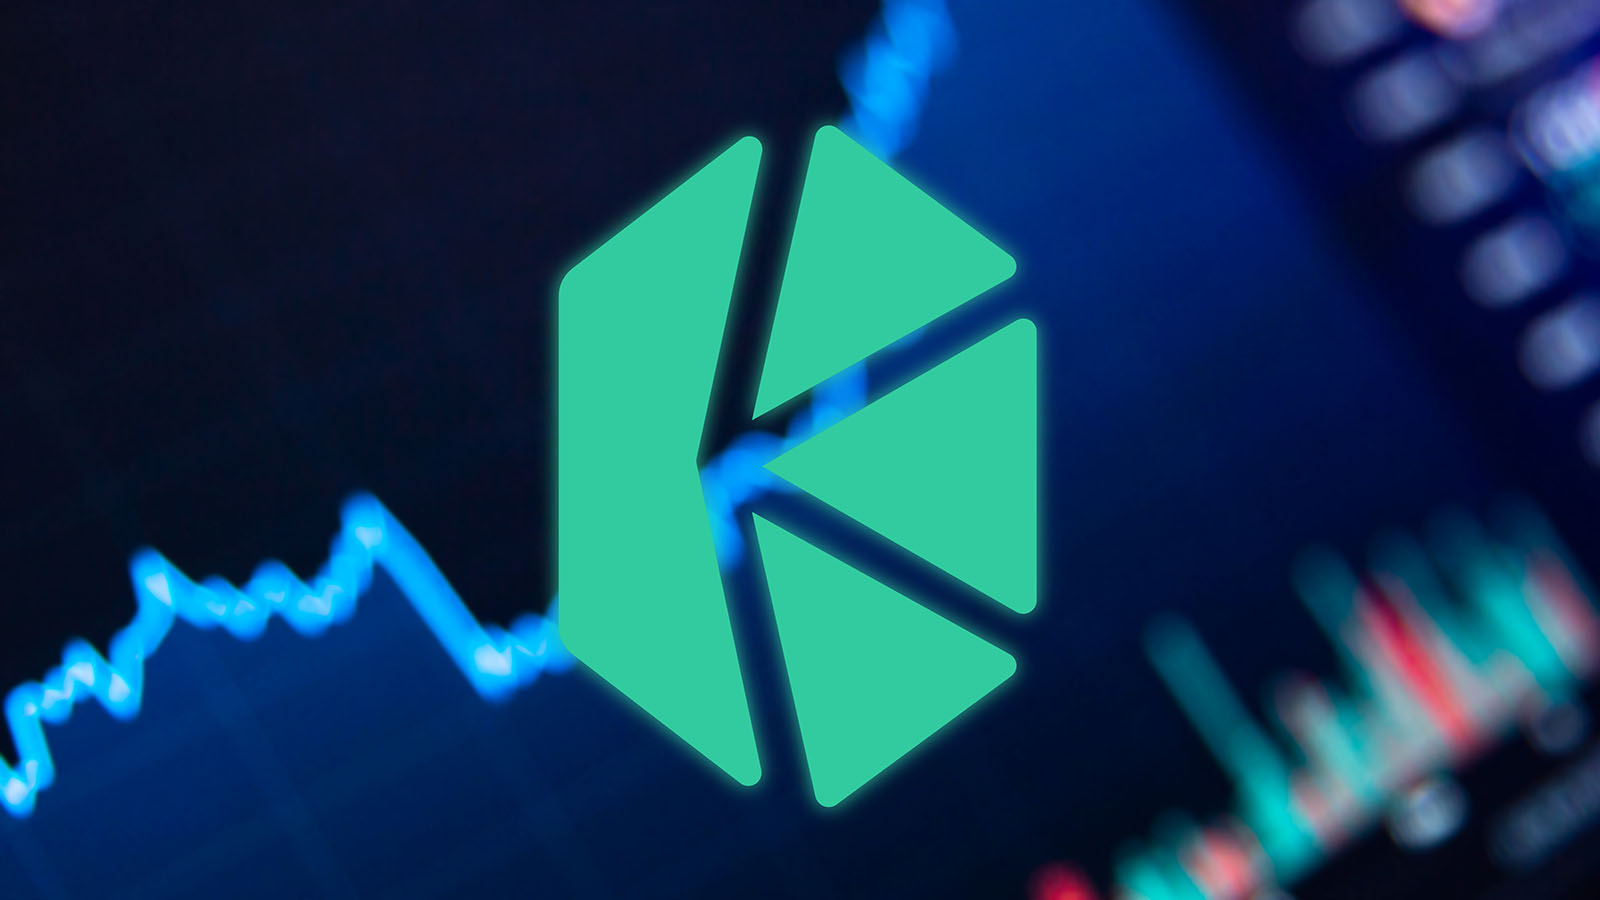 A digital rendering of the Kyber Network (KNC) crypto representing Kyber Network Price Predictions.